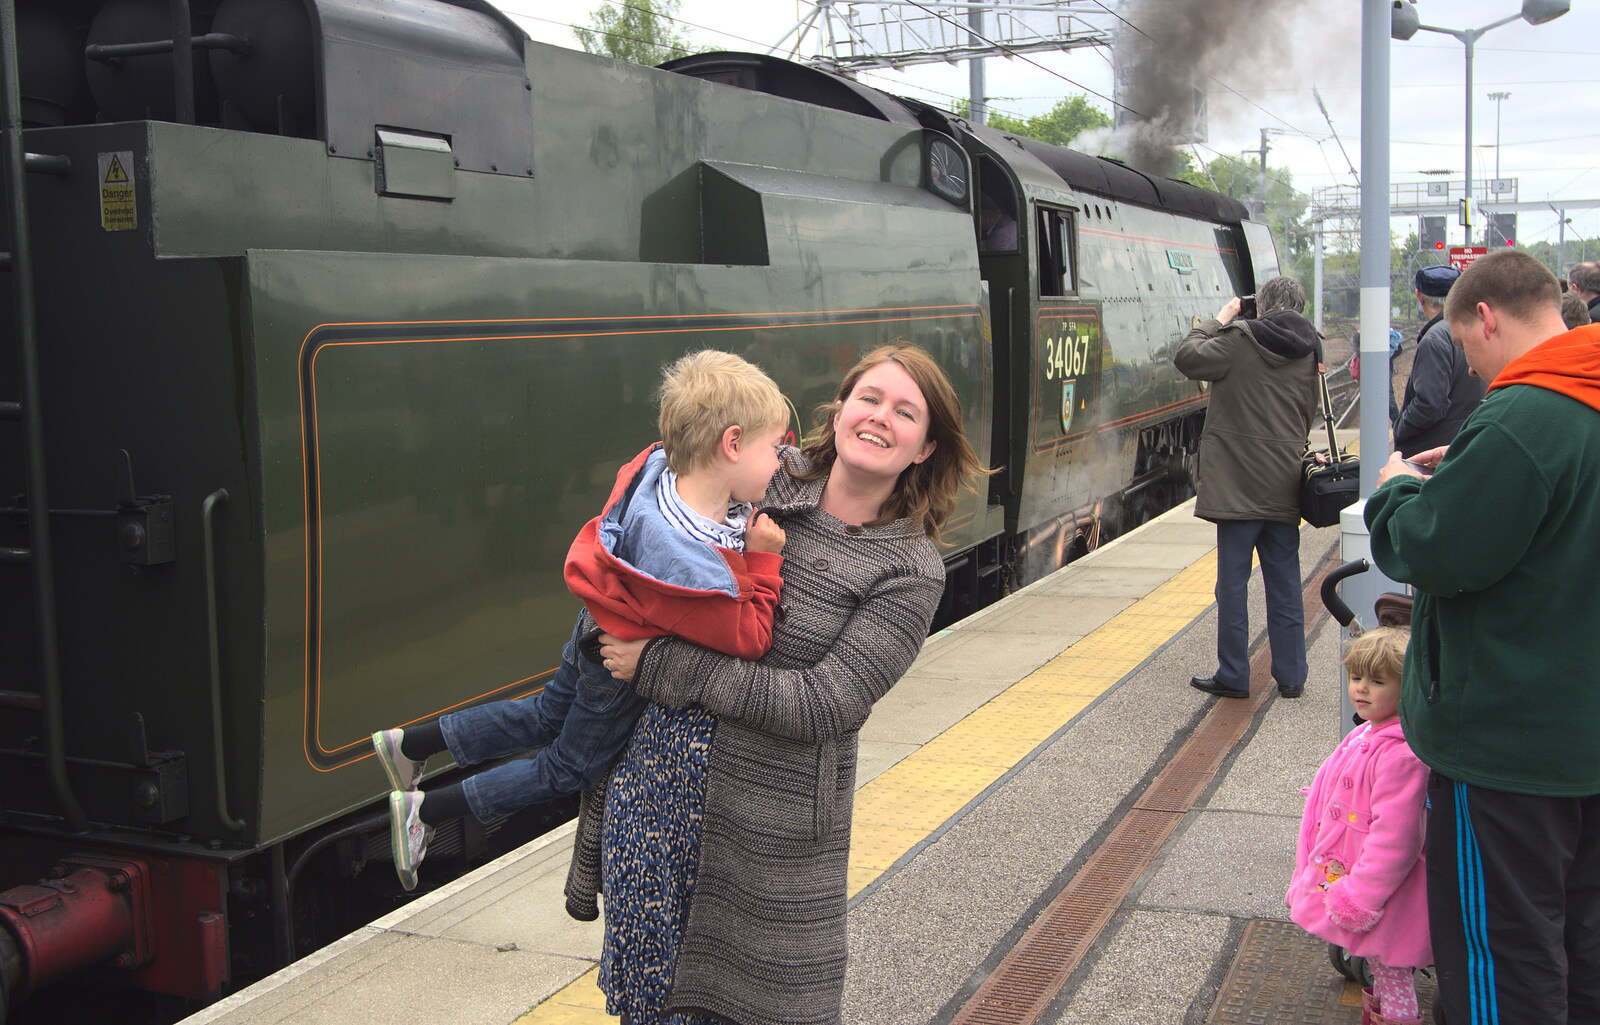 Isobel swings Fred around from Tangmere at Norwich Station, Norwich, Norfolk - 25th May 2013